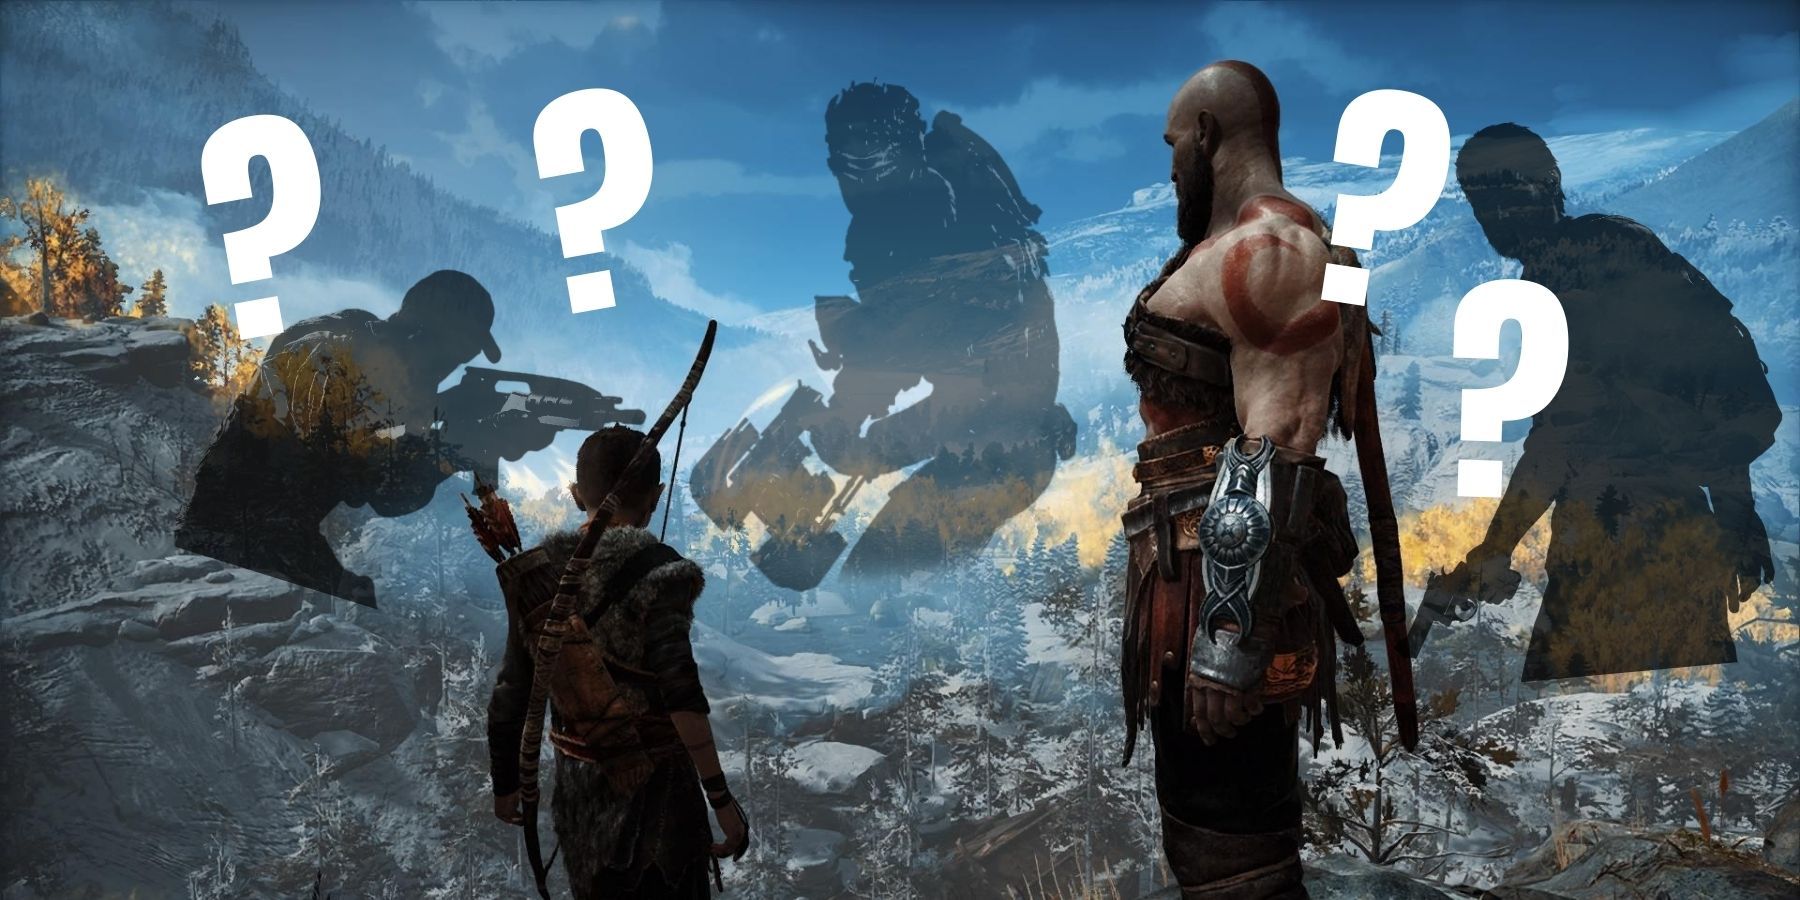 god of war one shot video games call of duty last of us